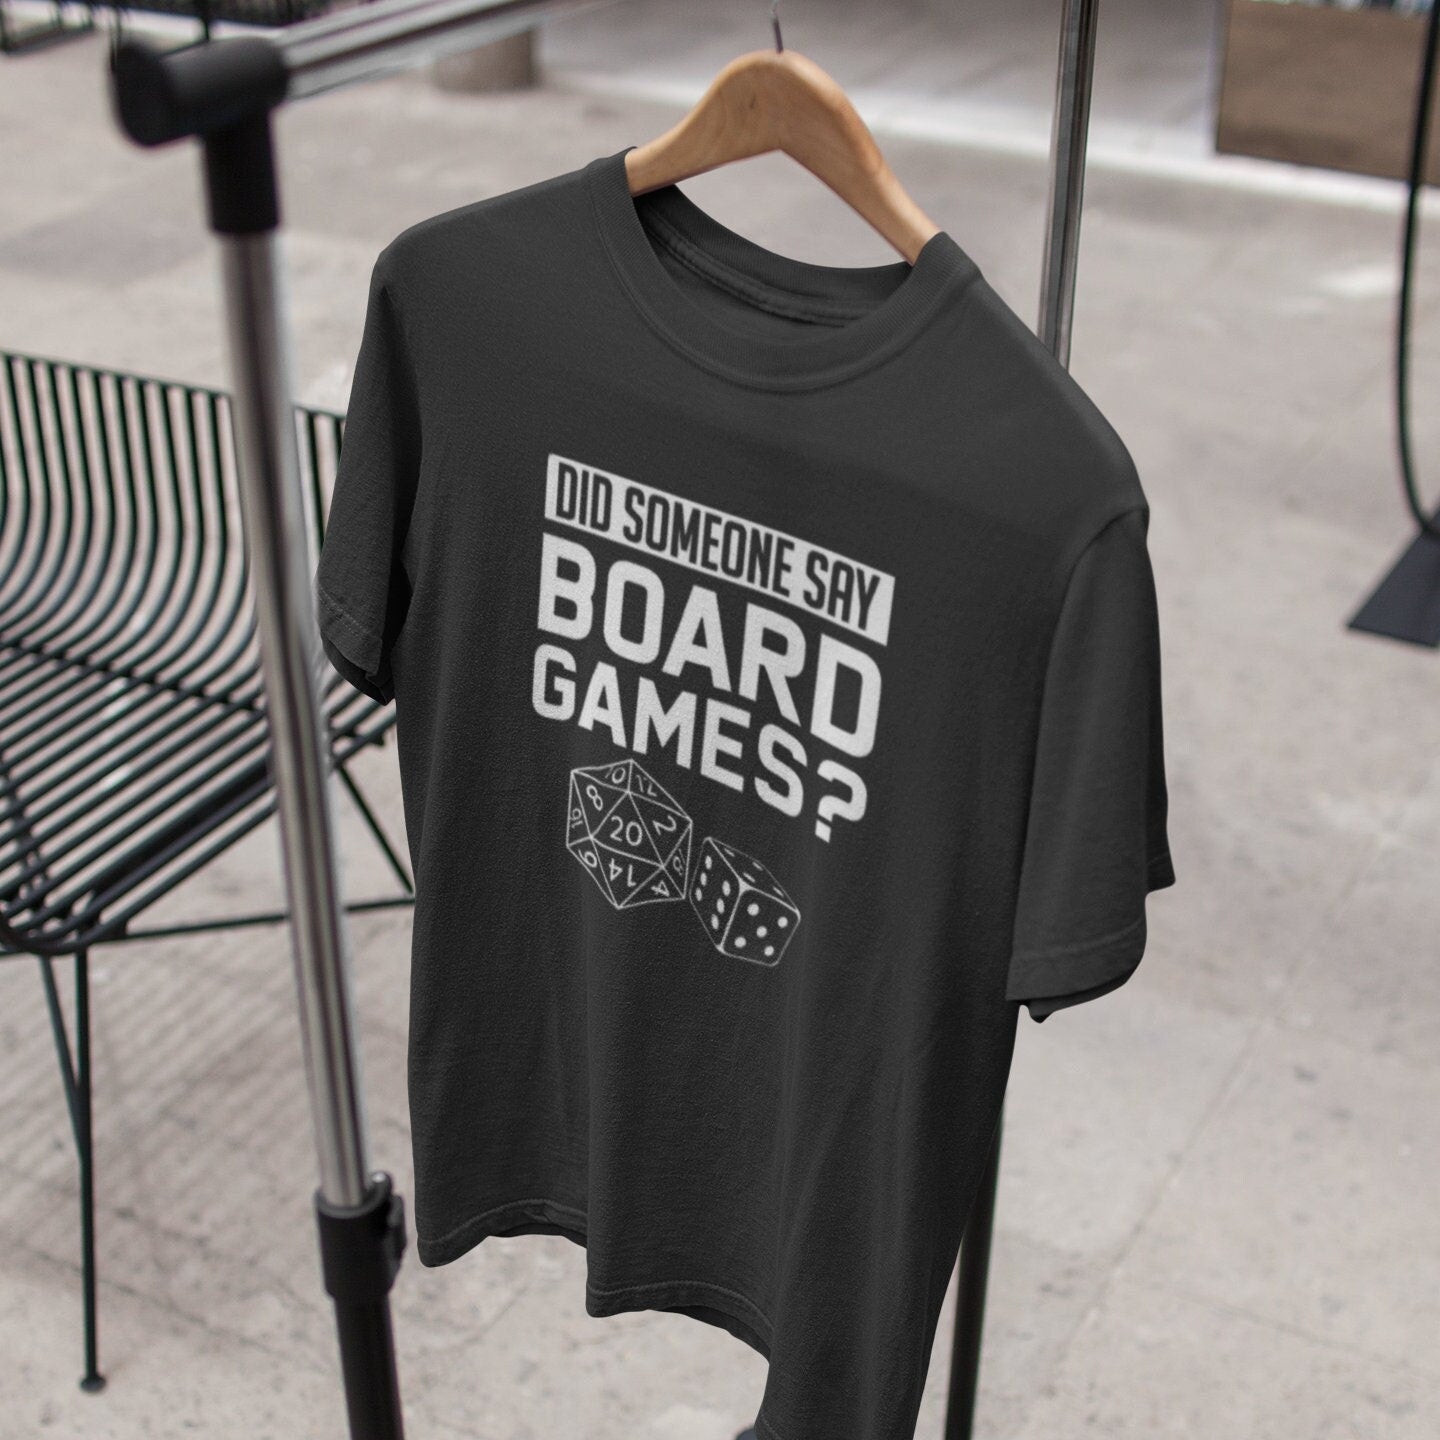 Did Someone Say Board Games? |Board Game Lover T Shirt | Board Game T Shirt | Board Games